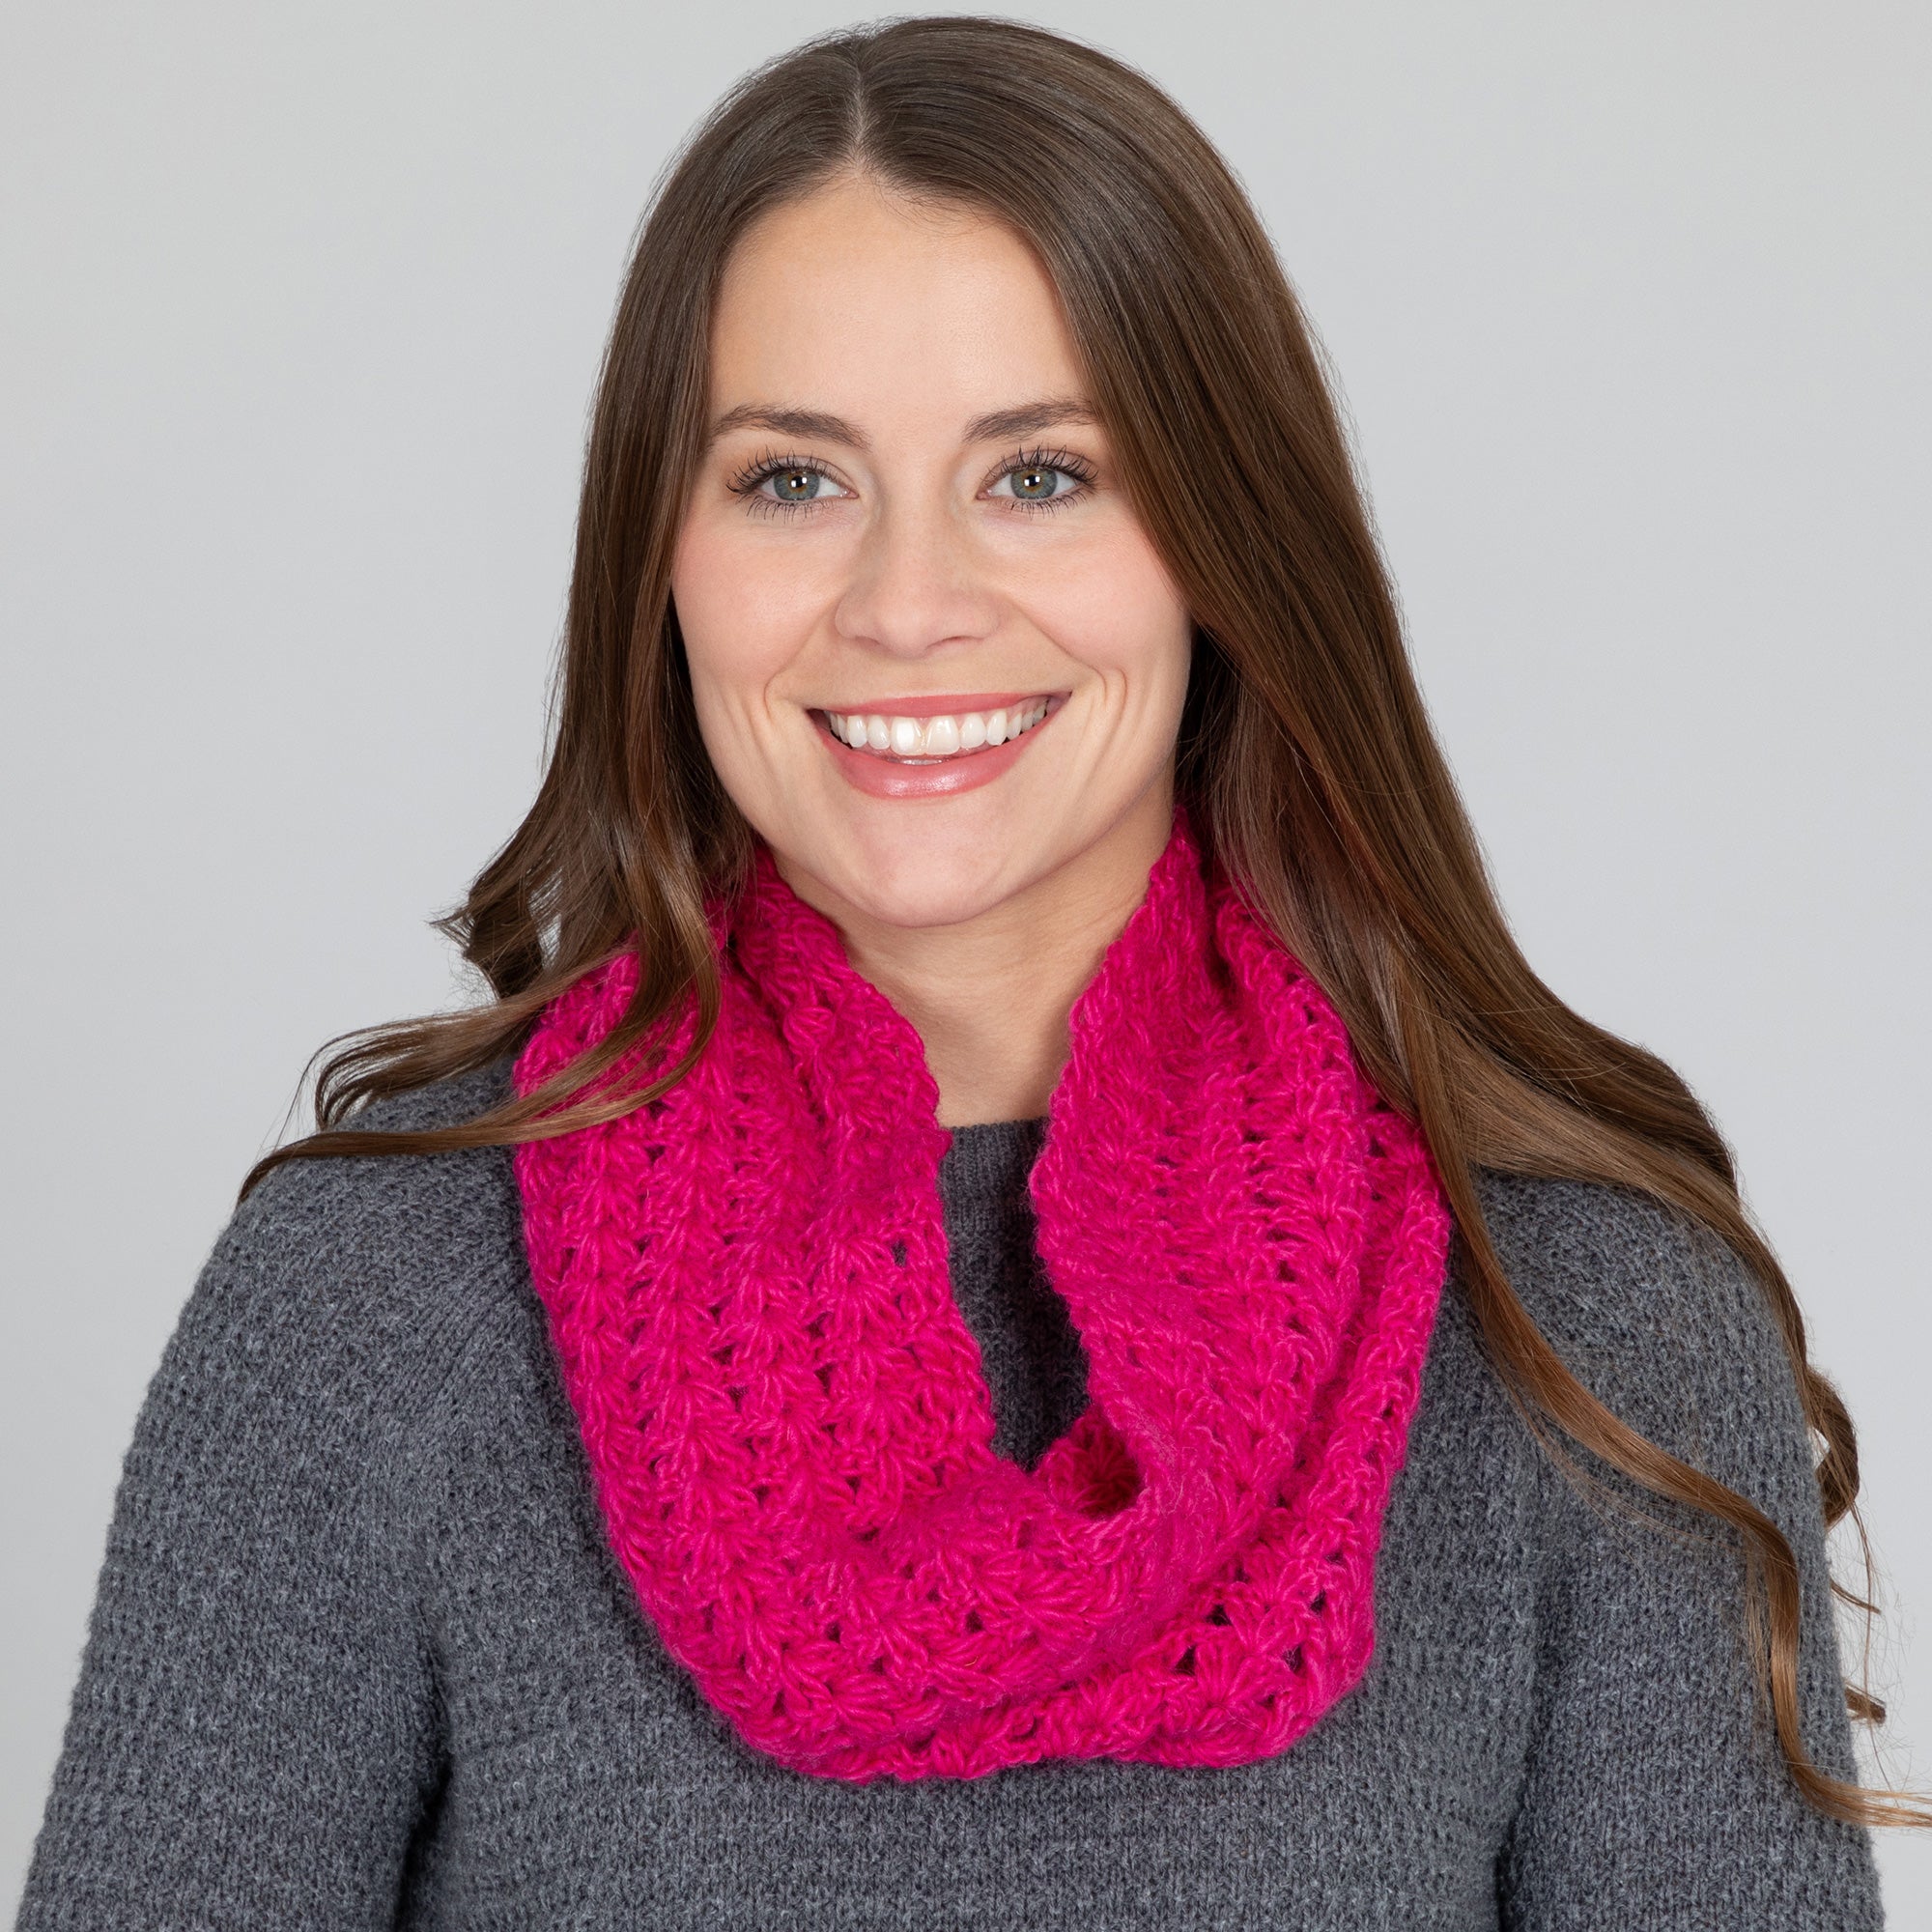 Waves Of Color Infinity Scarf - Crochet Pink